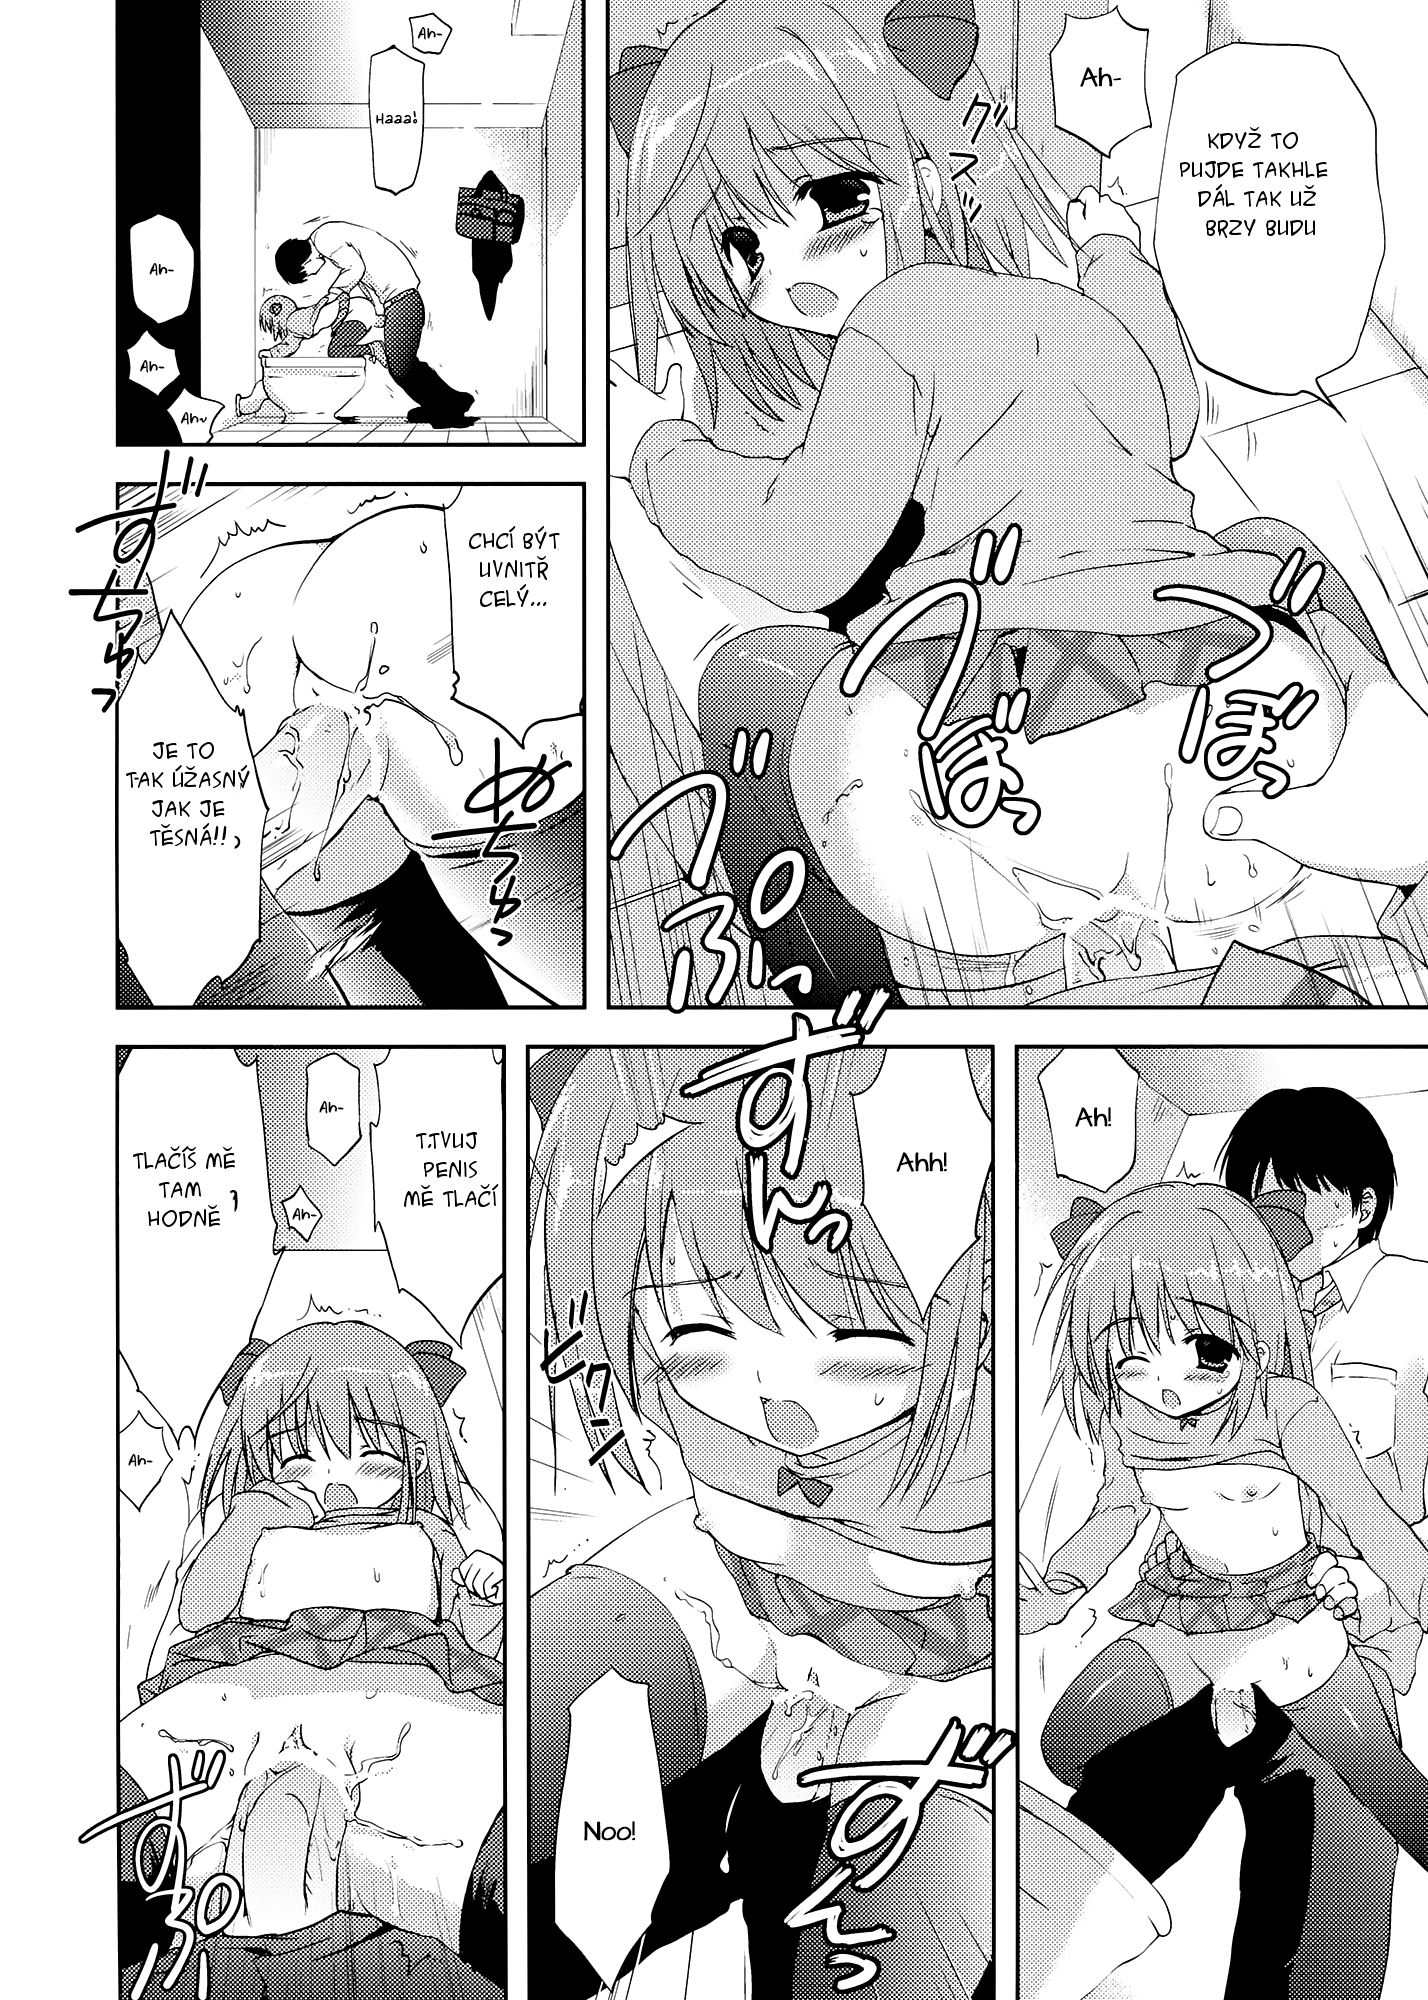 Doki The Story Of How I Did It With An Elementary Schooler For Only 30 Yen Original Page 06